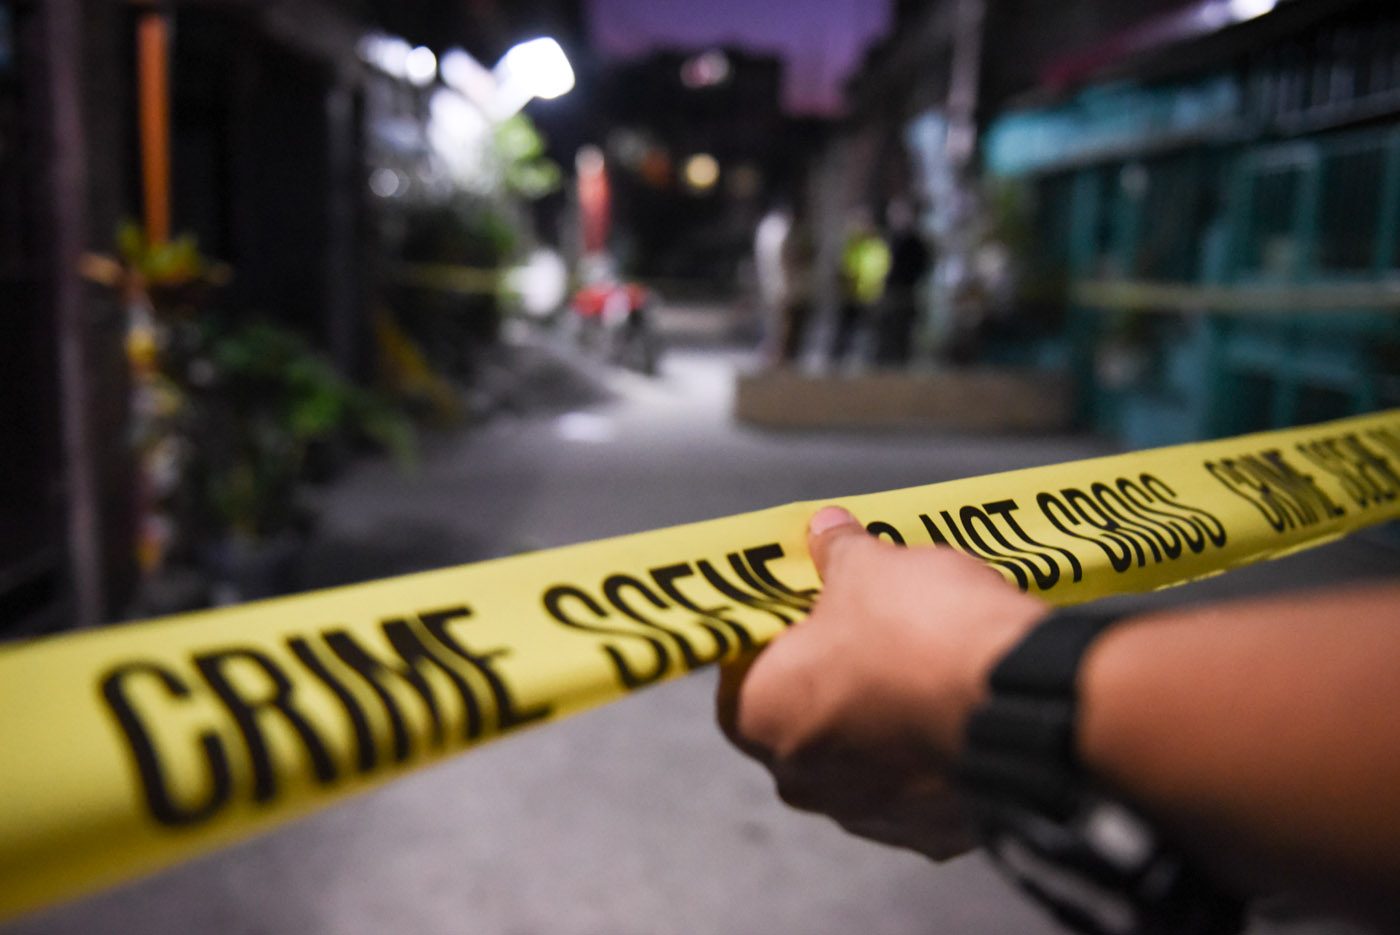 Fewer families fell victim to common crimes in Q2– SWS